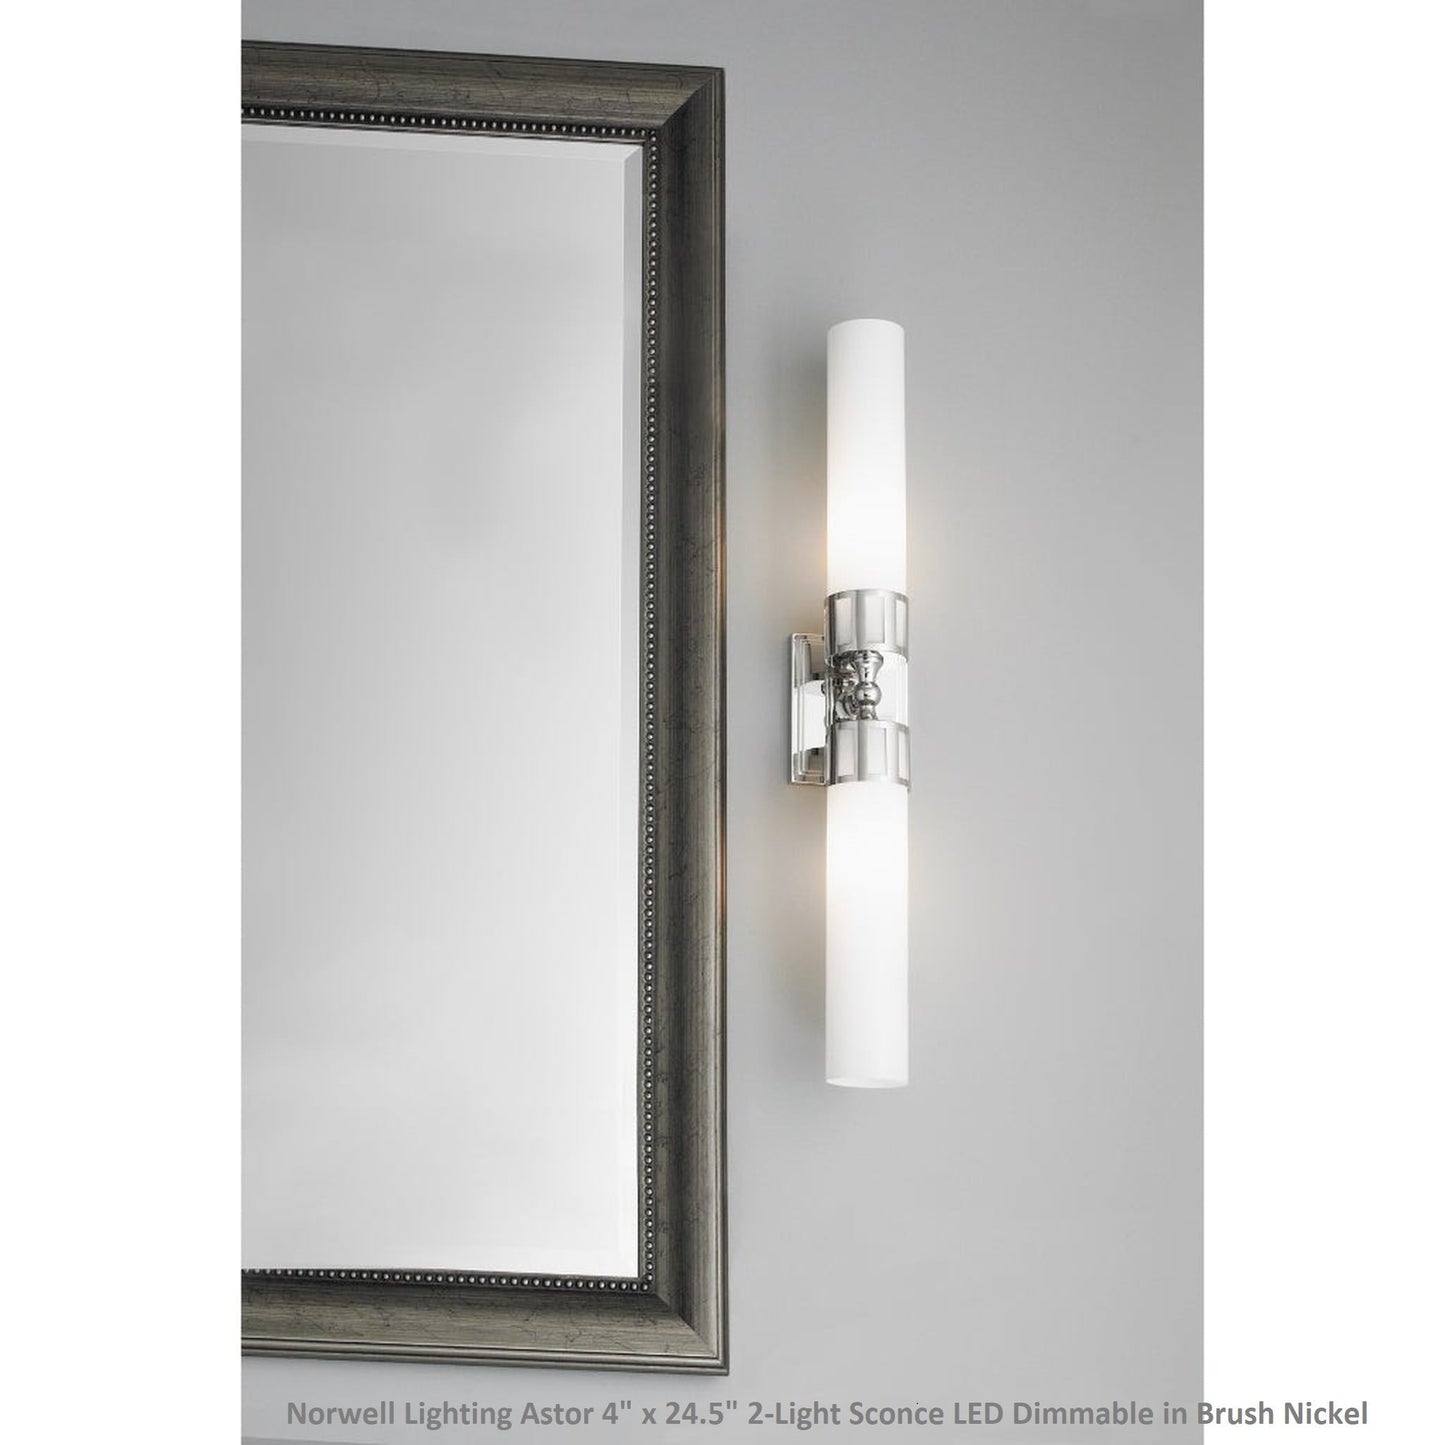 Norwell Lighting Astor 4" x 25" Chrome Horizontal/Vertical Vanity LED Sconce With Shiny Opal Glass Diffuser